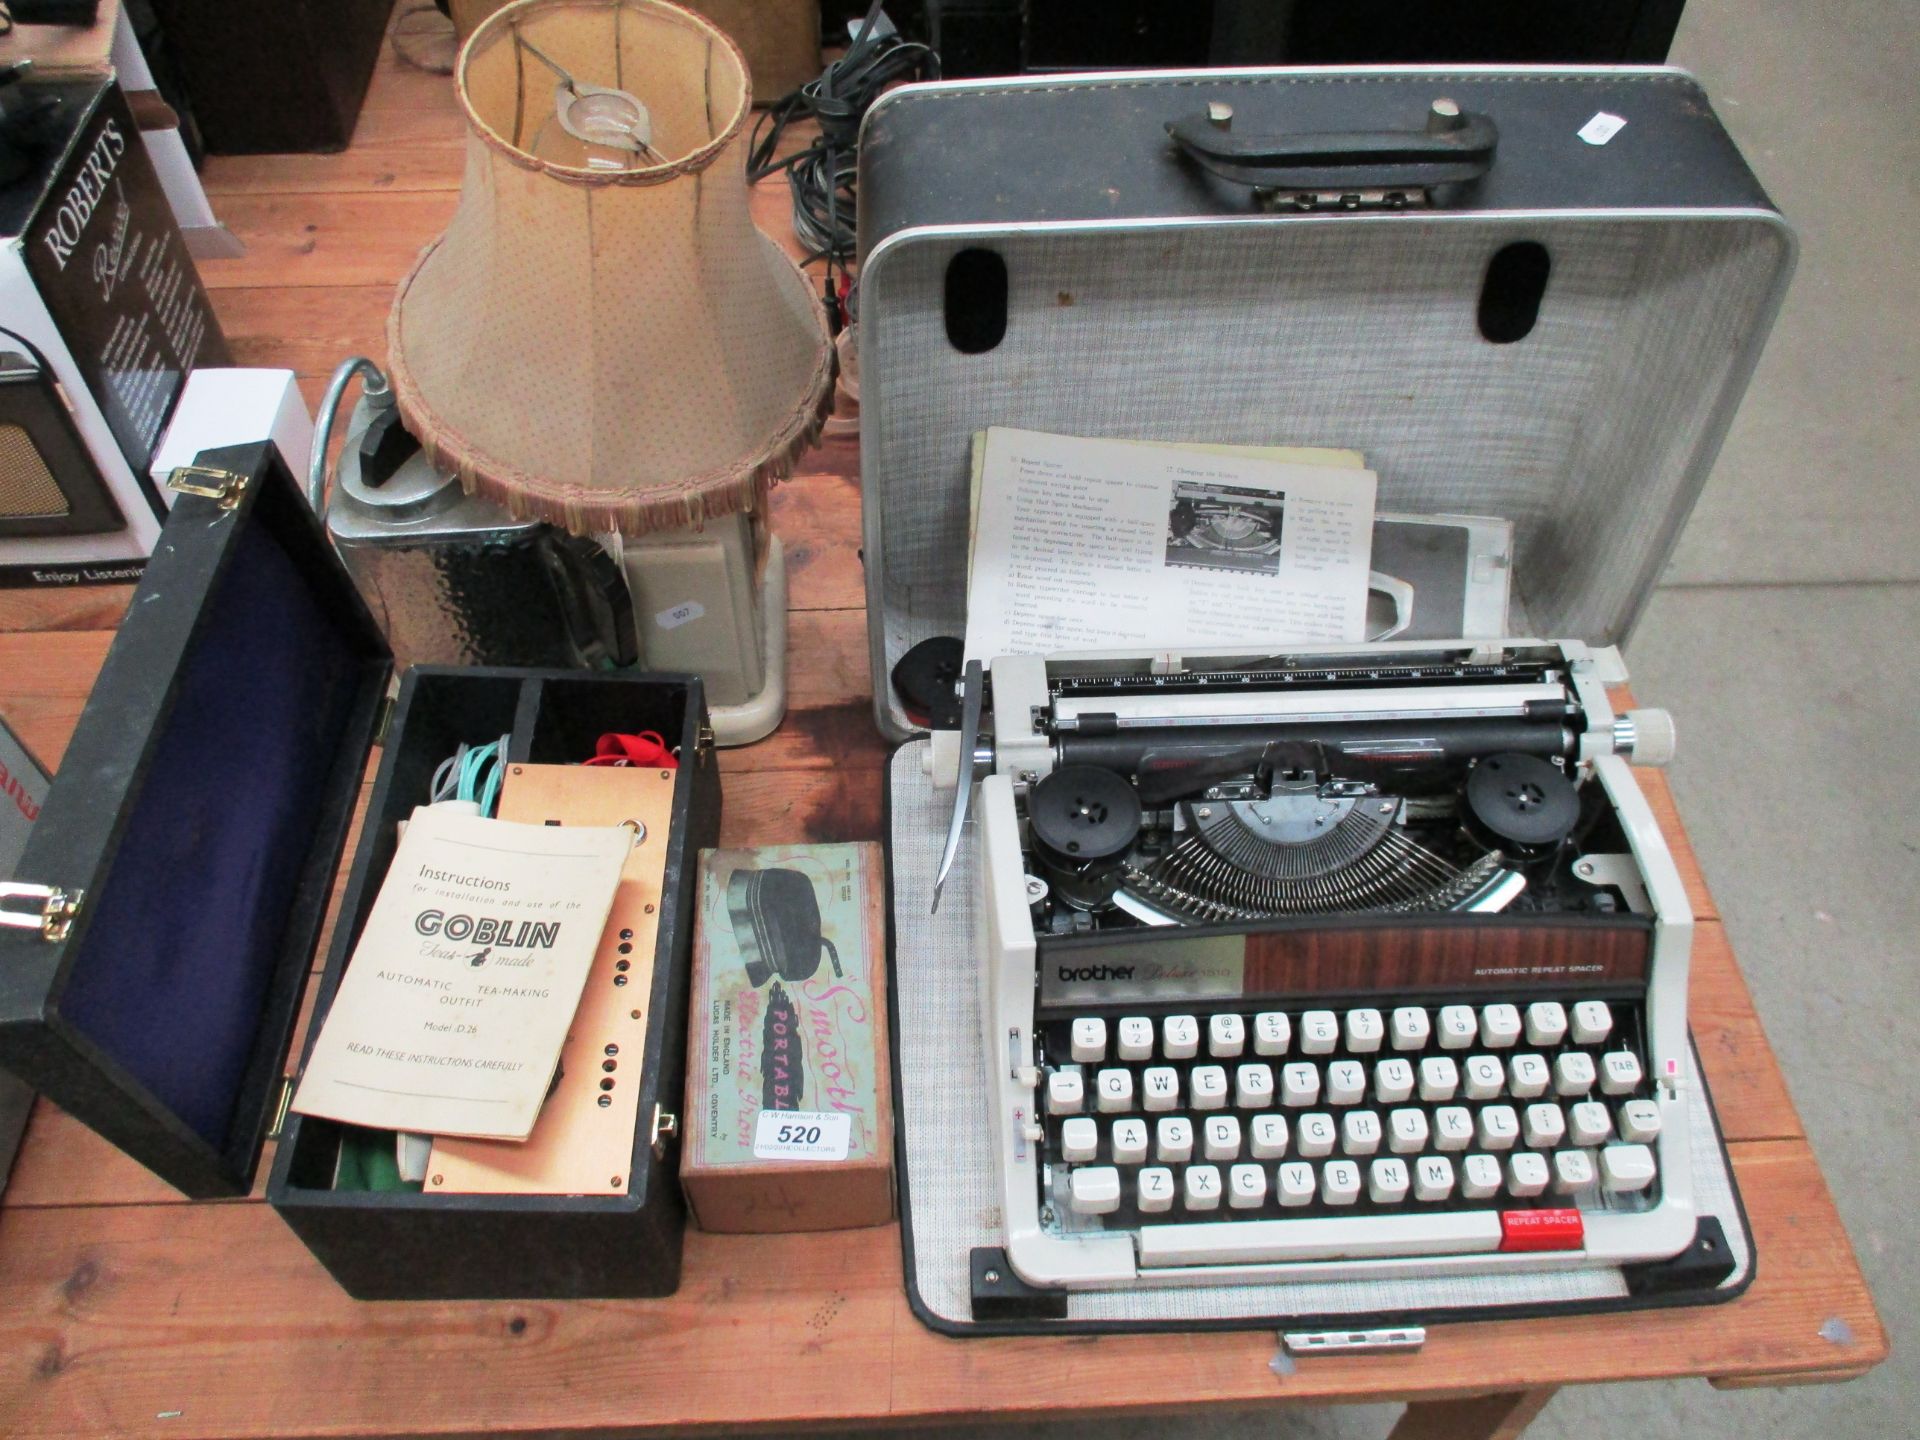 A Brother Deluxe 1510 manual typewriter, a Goblin teasmade,